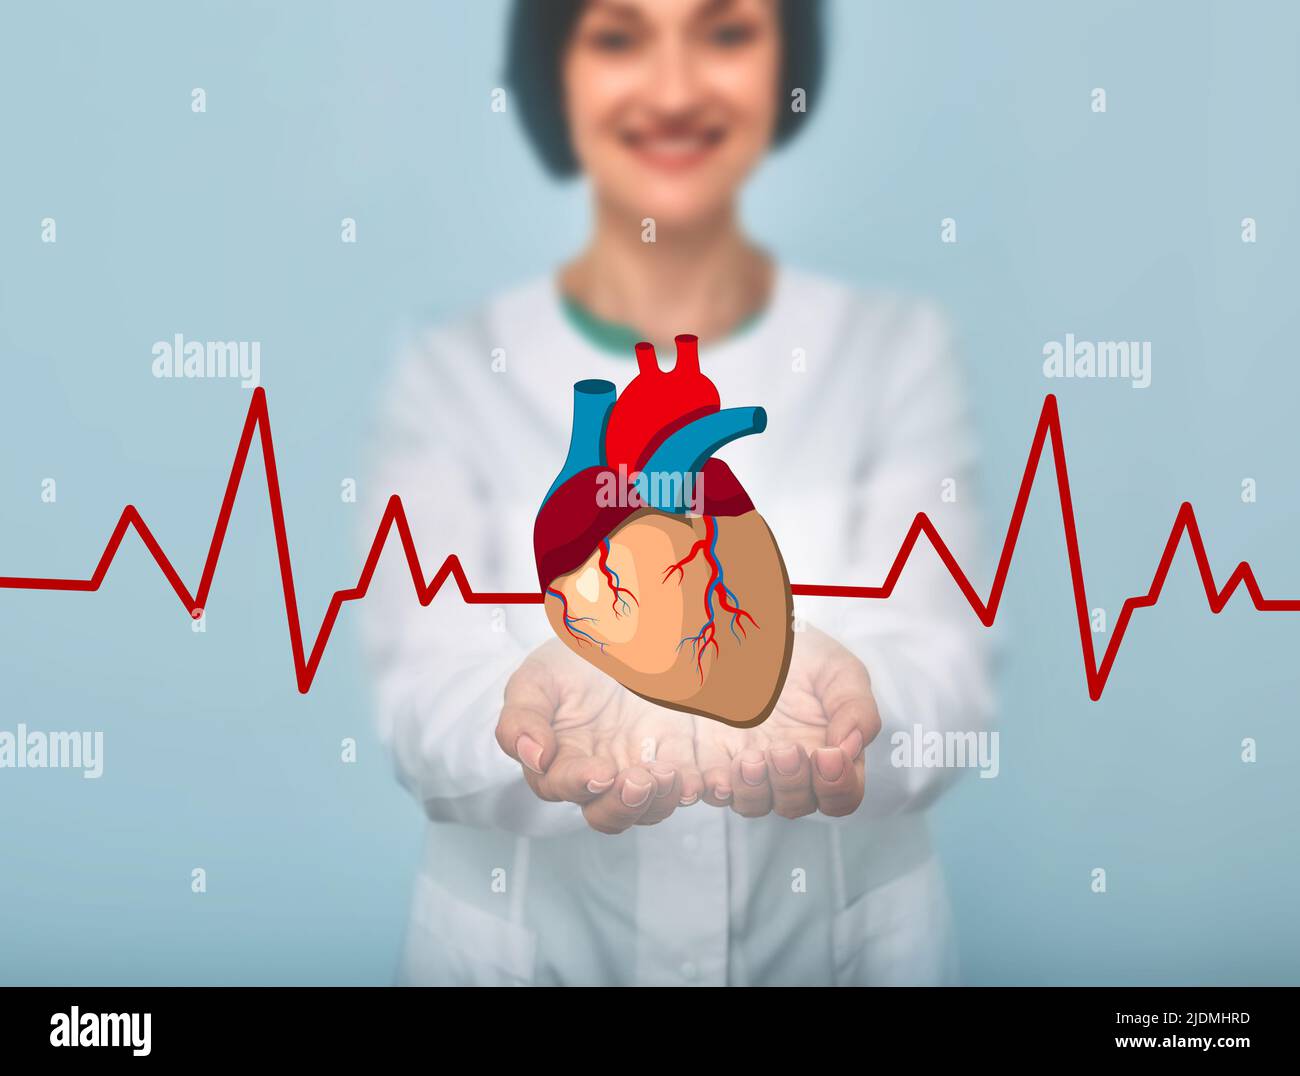 Friendly doctor holding model of human heart with heartbeat. Concept of cardiac health and cardiovascular system Stock Photo